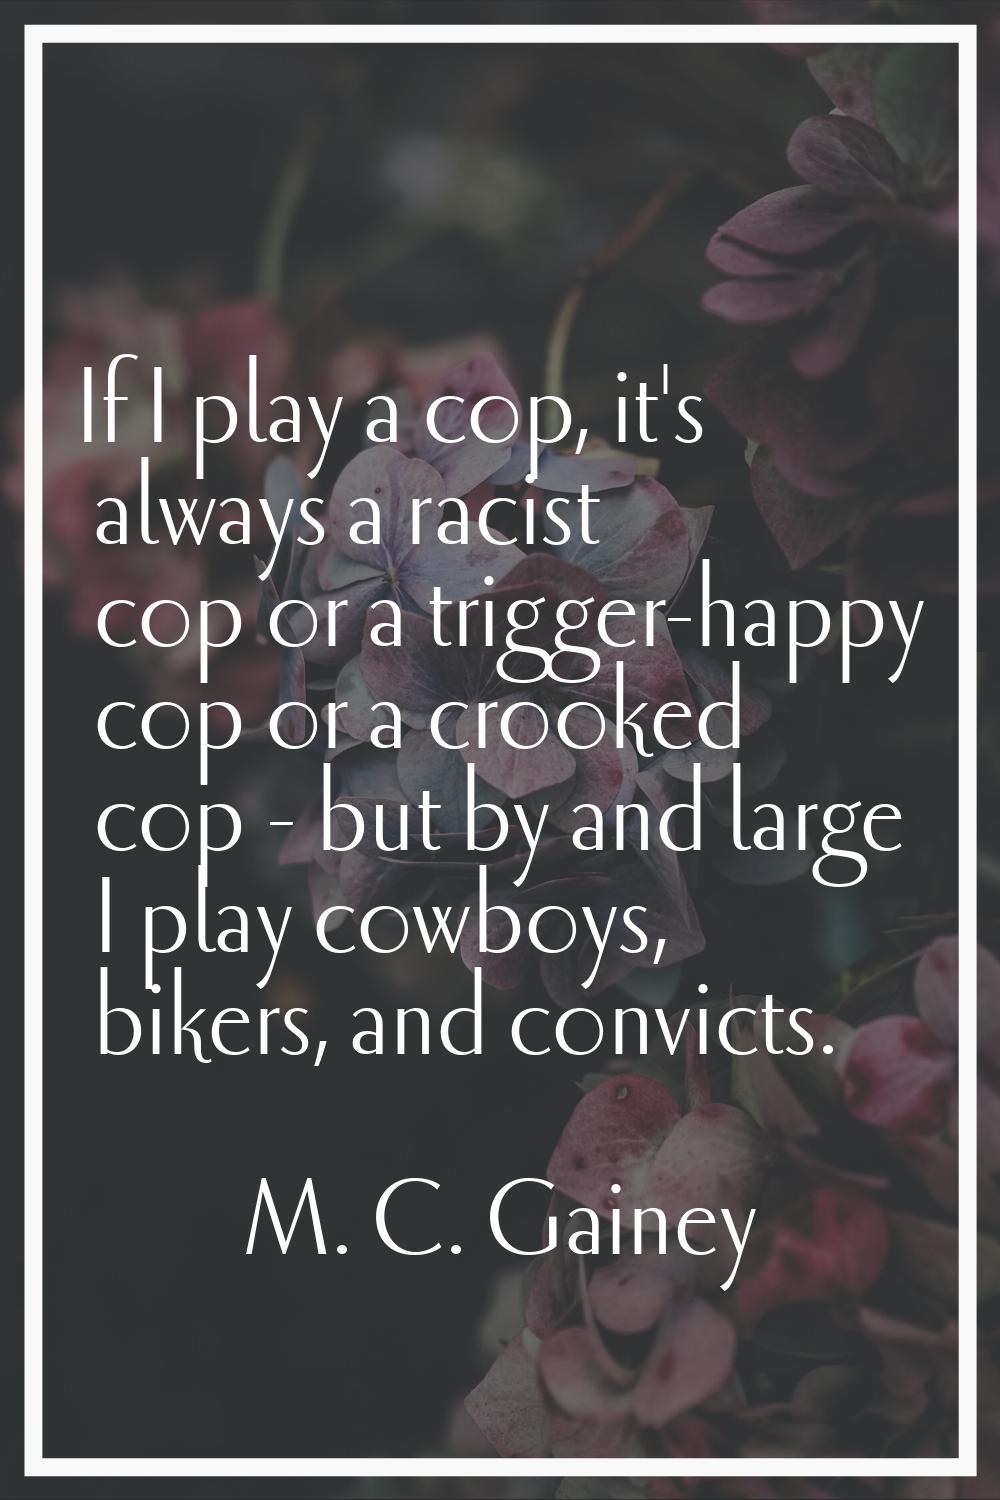 If I play a cop, it's always a racist cop or a trigger-happy cop or a crooked cop - but by and larg